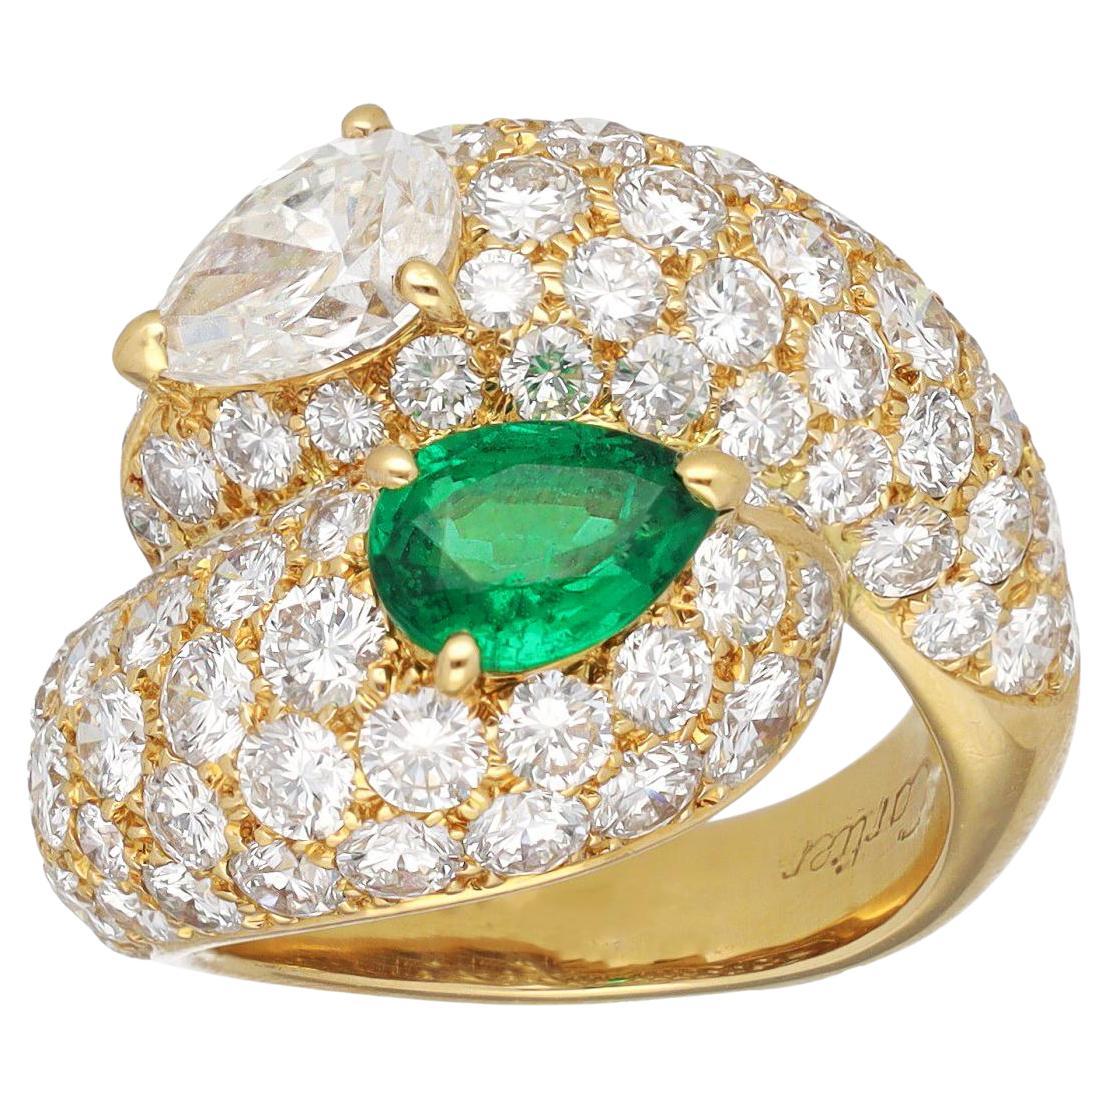 Cartier 'Toi Et Moi' Emerald and Diamond Ring For Sale